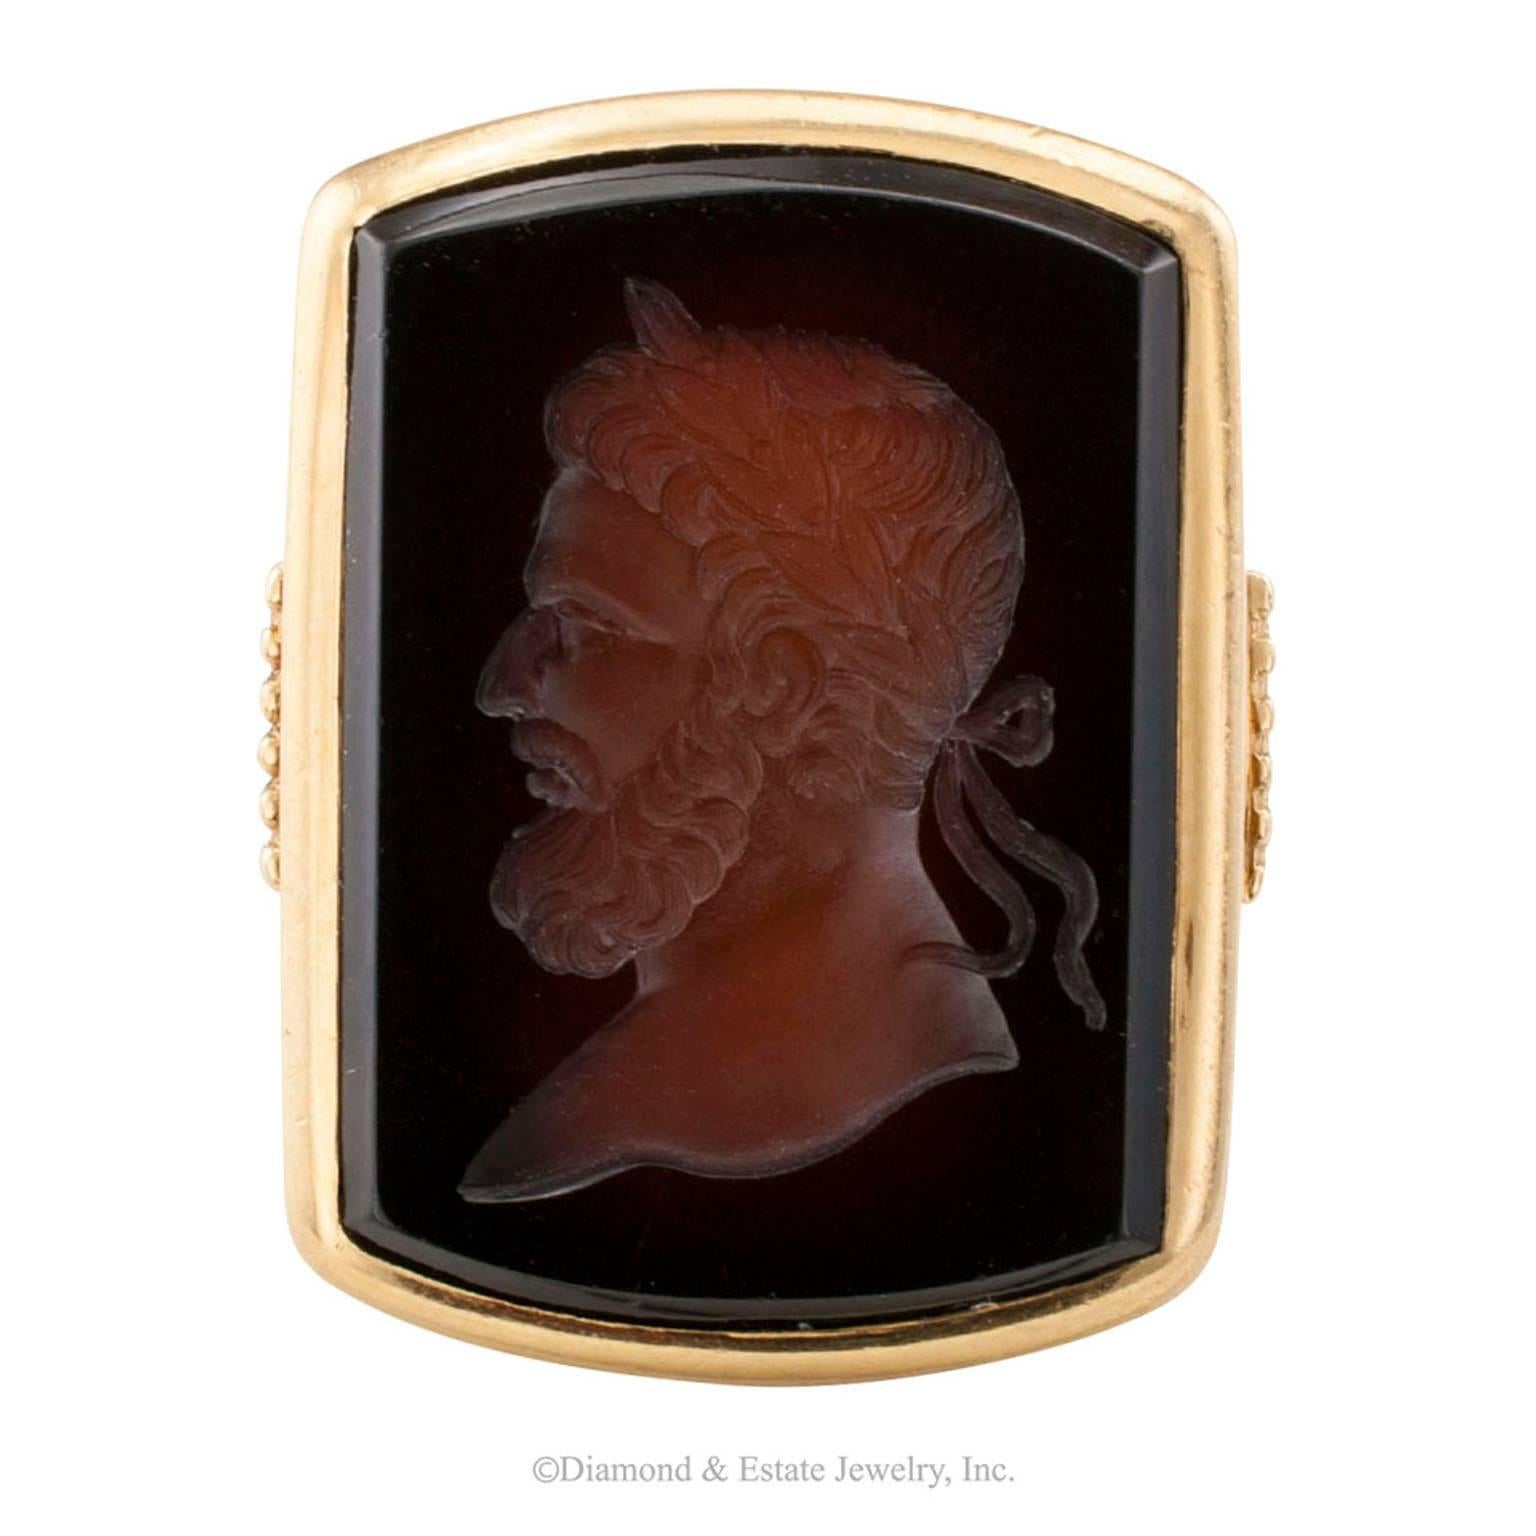 Art Deco 1920s Sardonyx Intaglio Gentlemans Gold Ring

Art Deco 1920s sardonyx intaglio and gold ring.  The Greco-Roman inspired design features a large rectangular sardonyx plaque enlivened by a very  crisp and handsome carving depicting a